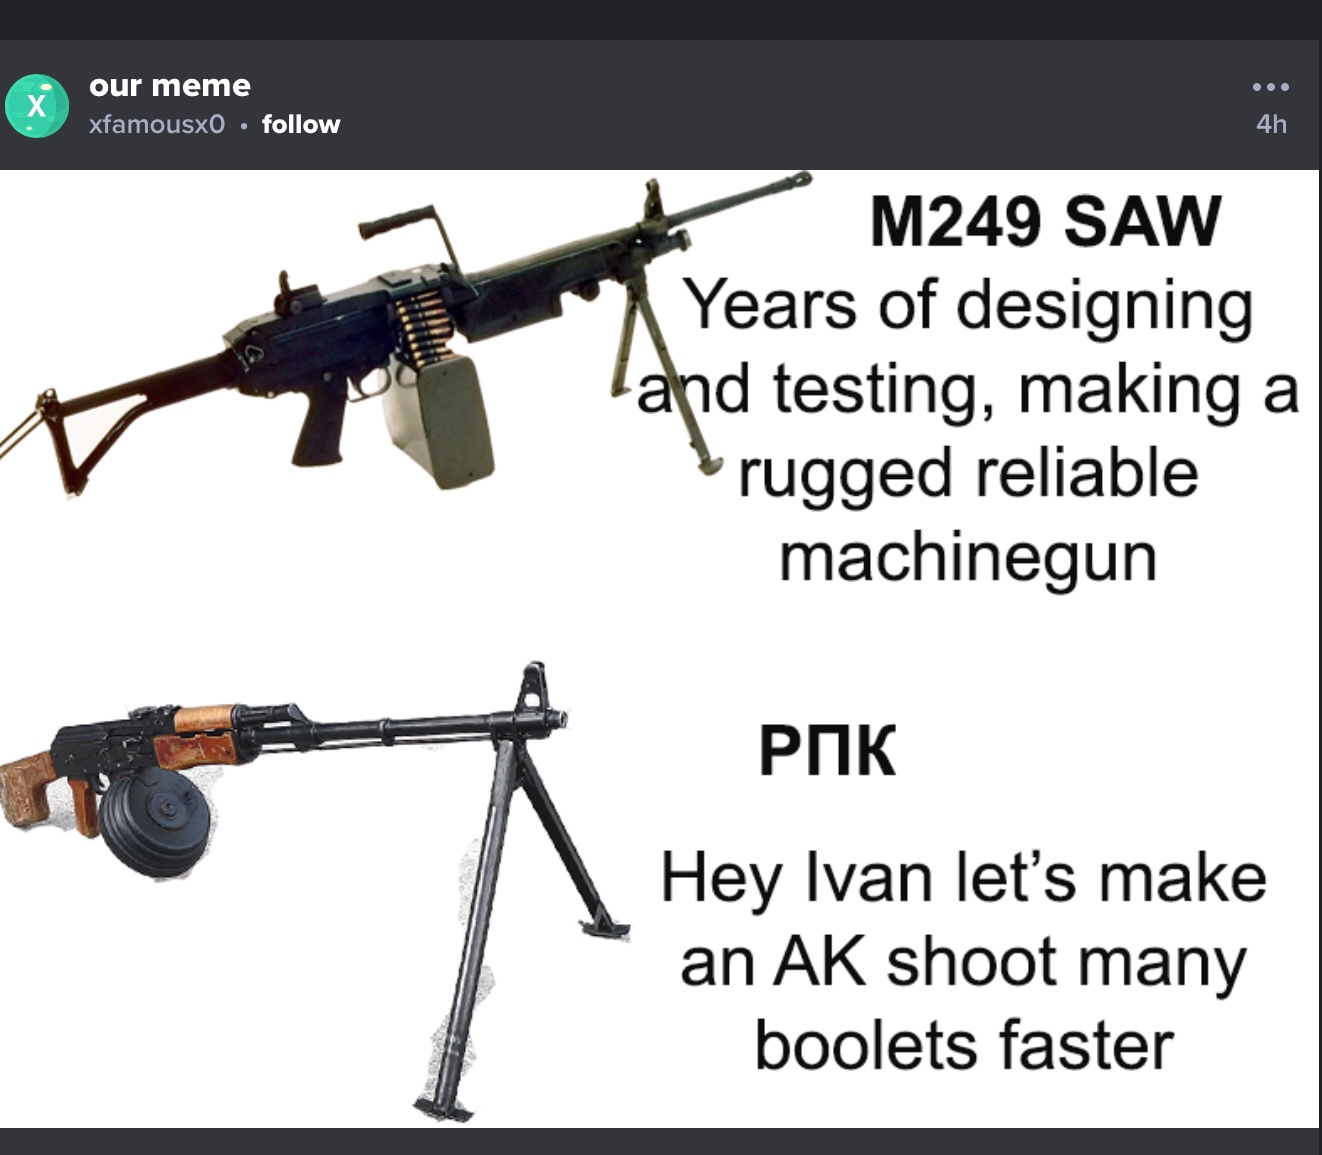 m249 meme - our meme xfamousx0 M249 Saw Years of designing Tand testing, making a rugged reliable machinegun Pok Hey Ivan let's make an Ak shoot many boolets faster